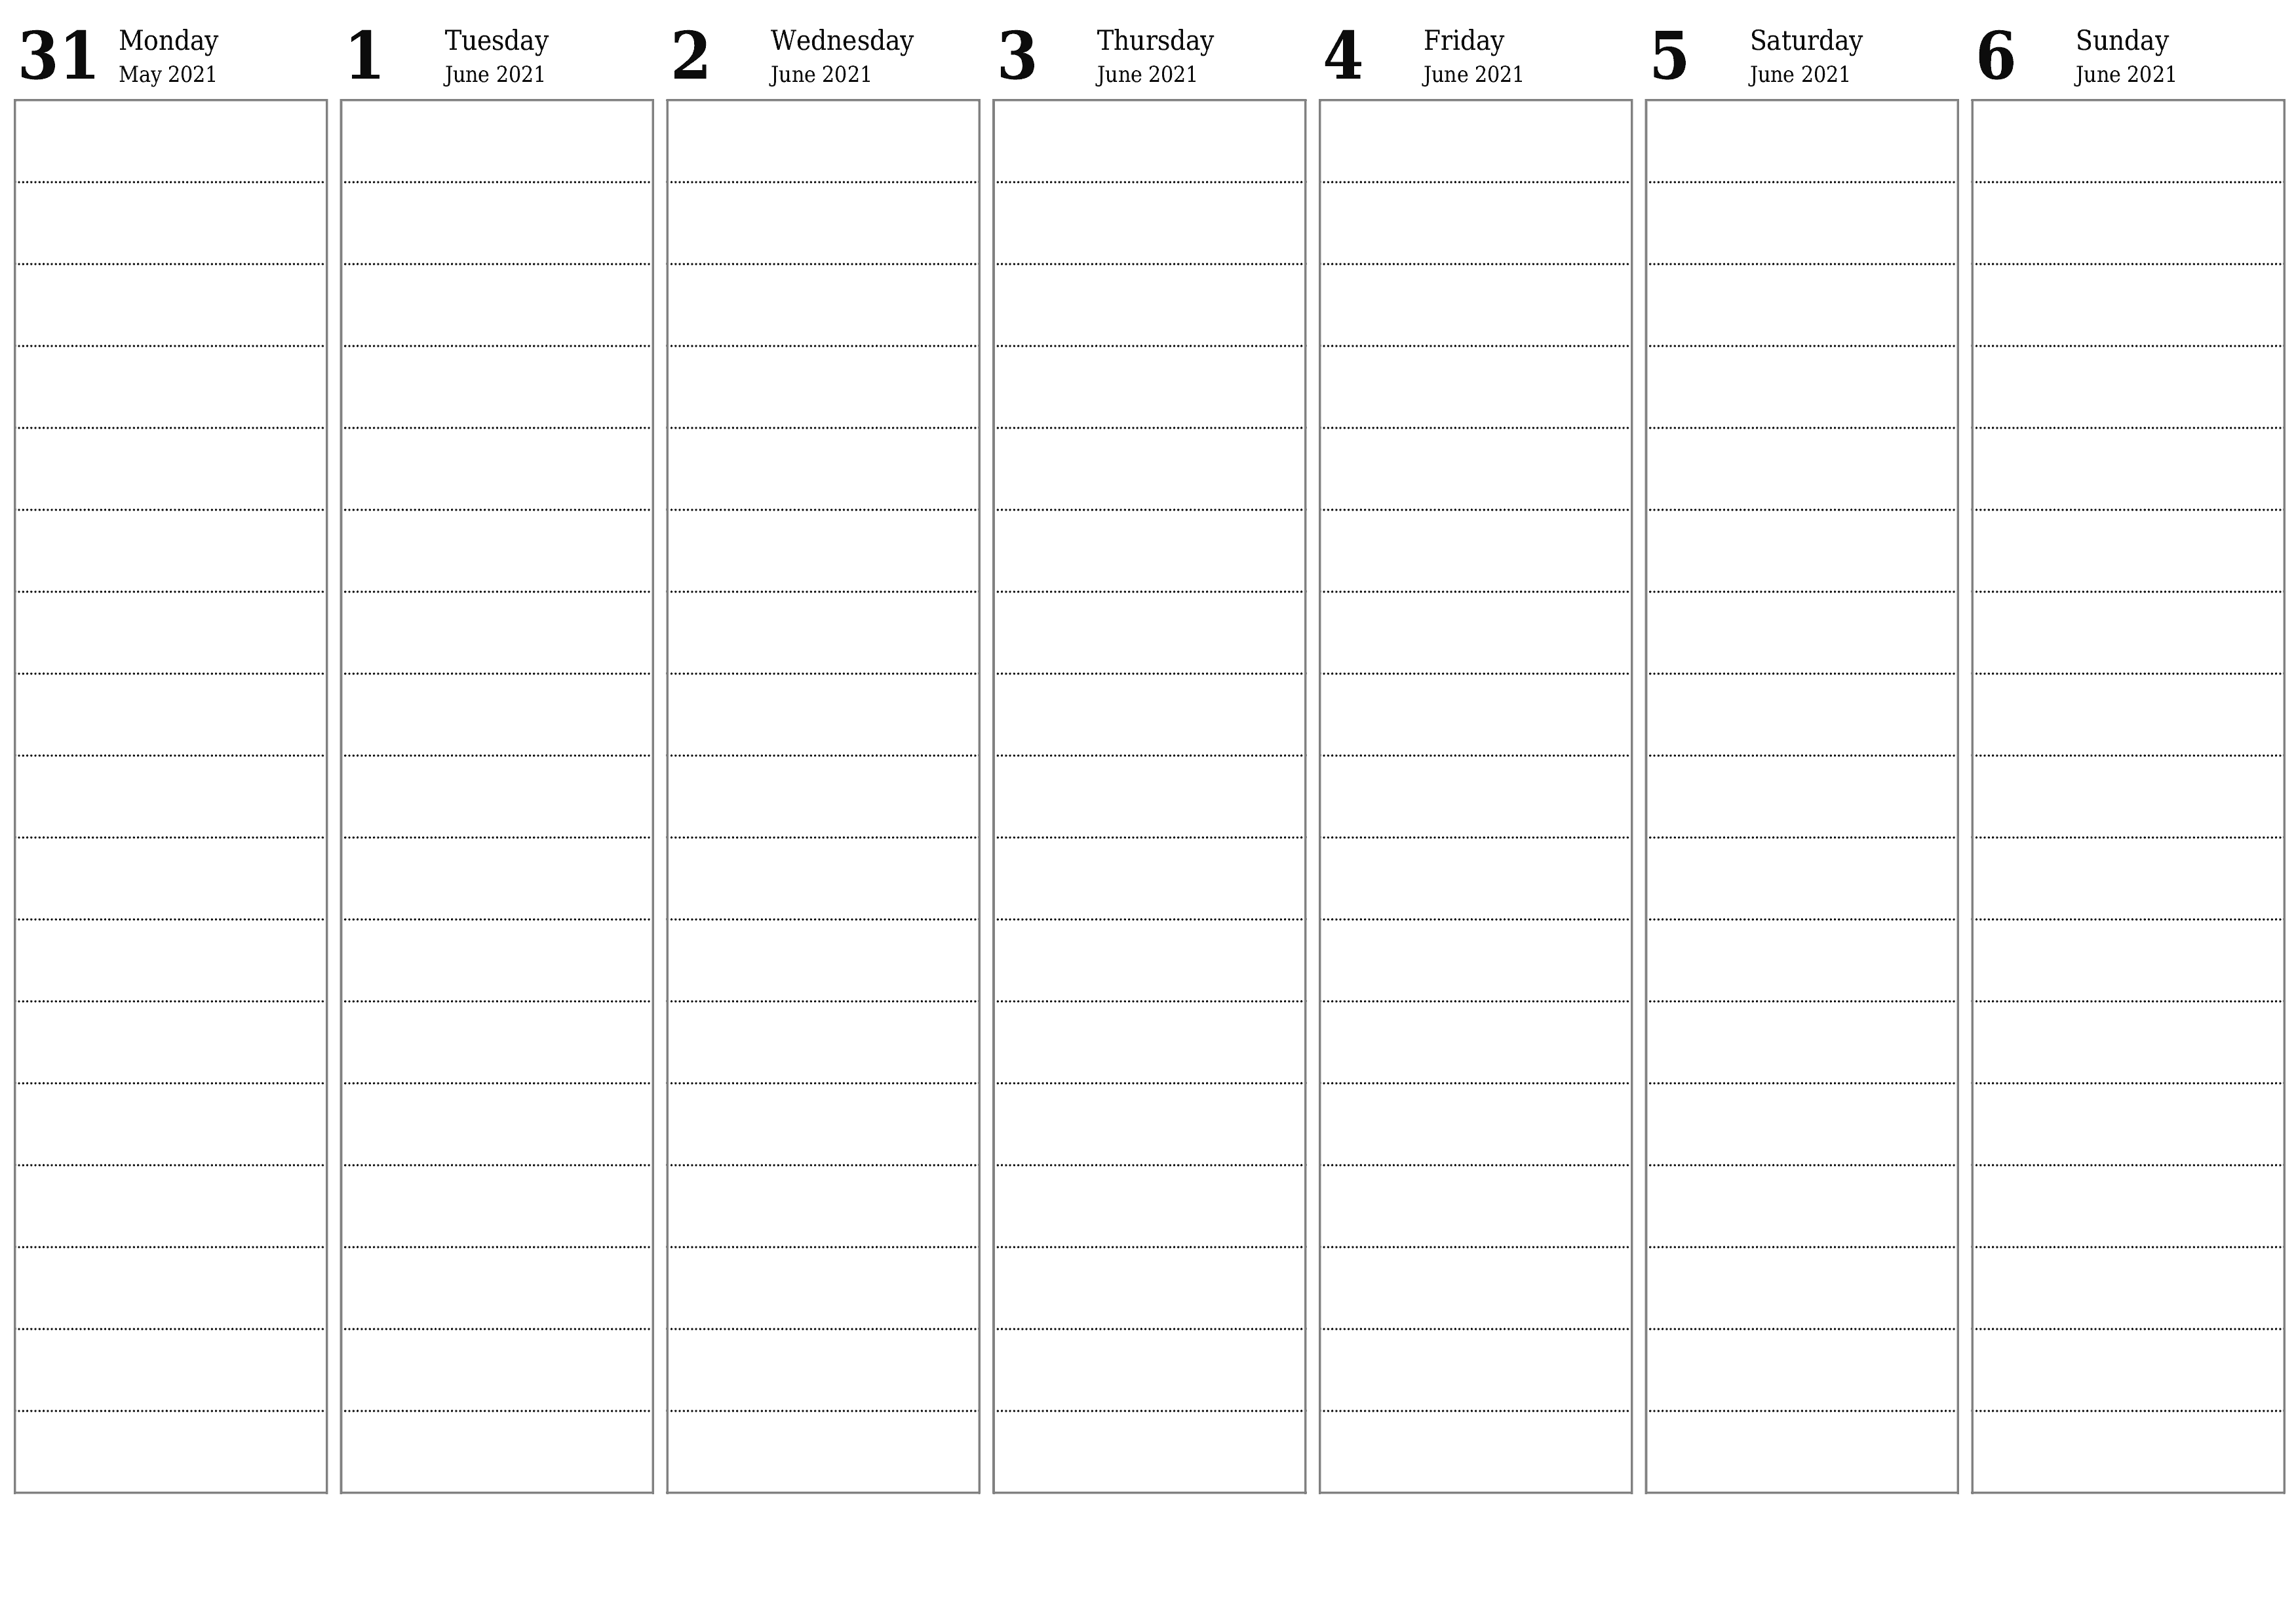 Blank weekly dated HD template image of calendar for week June 2021 save and print to PDF PNG English - 7calendar.com